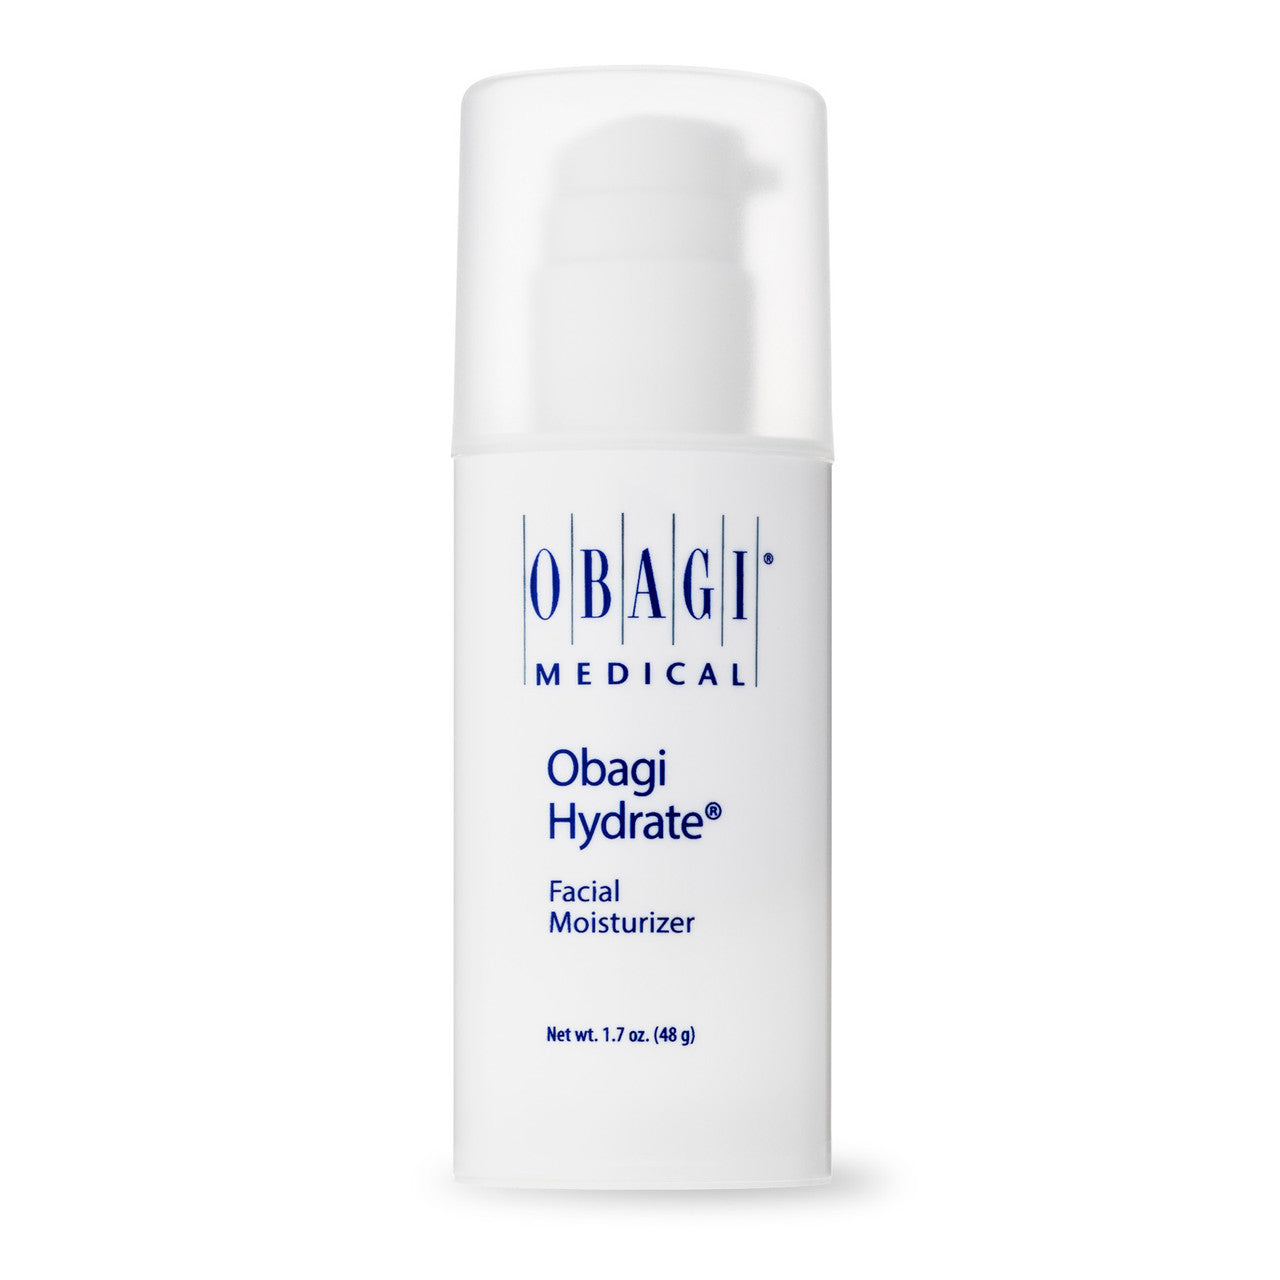 obagi-medical-hydrate-362032070193-product-front__82846.1665456859.1280.1280__43565.1694414376.1280.1280.jpg